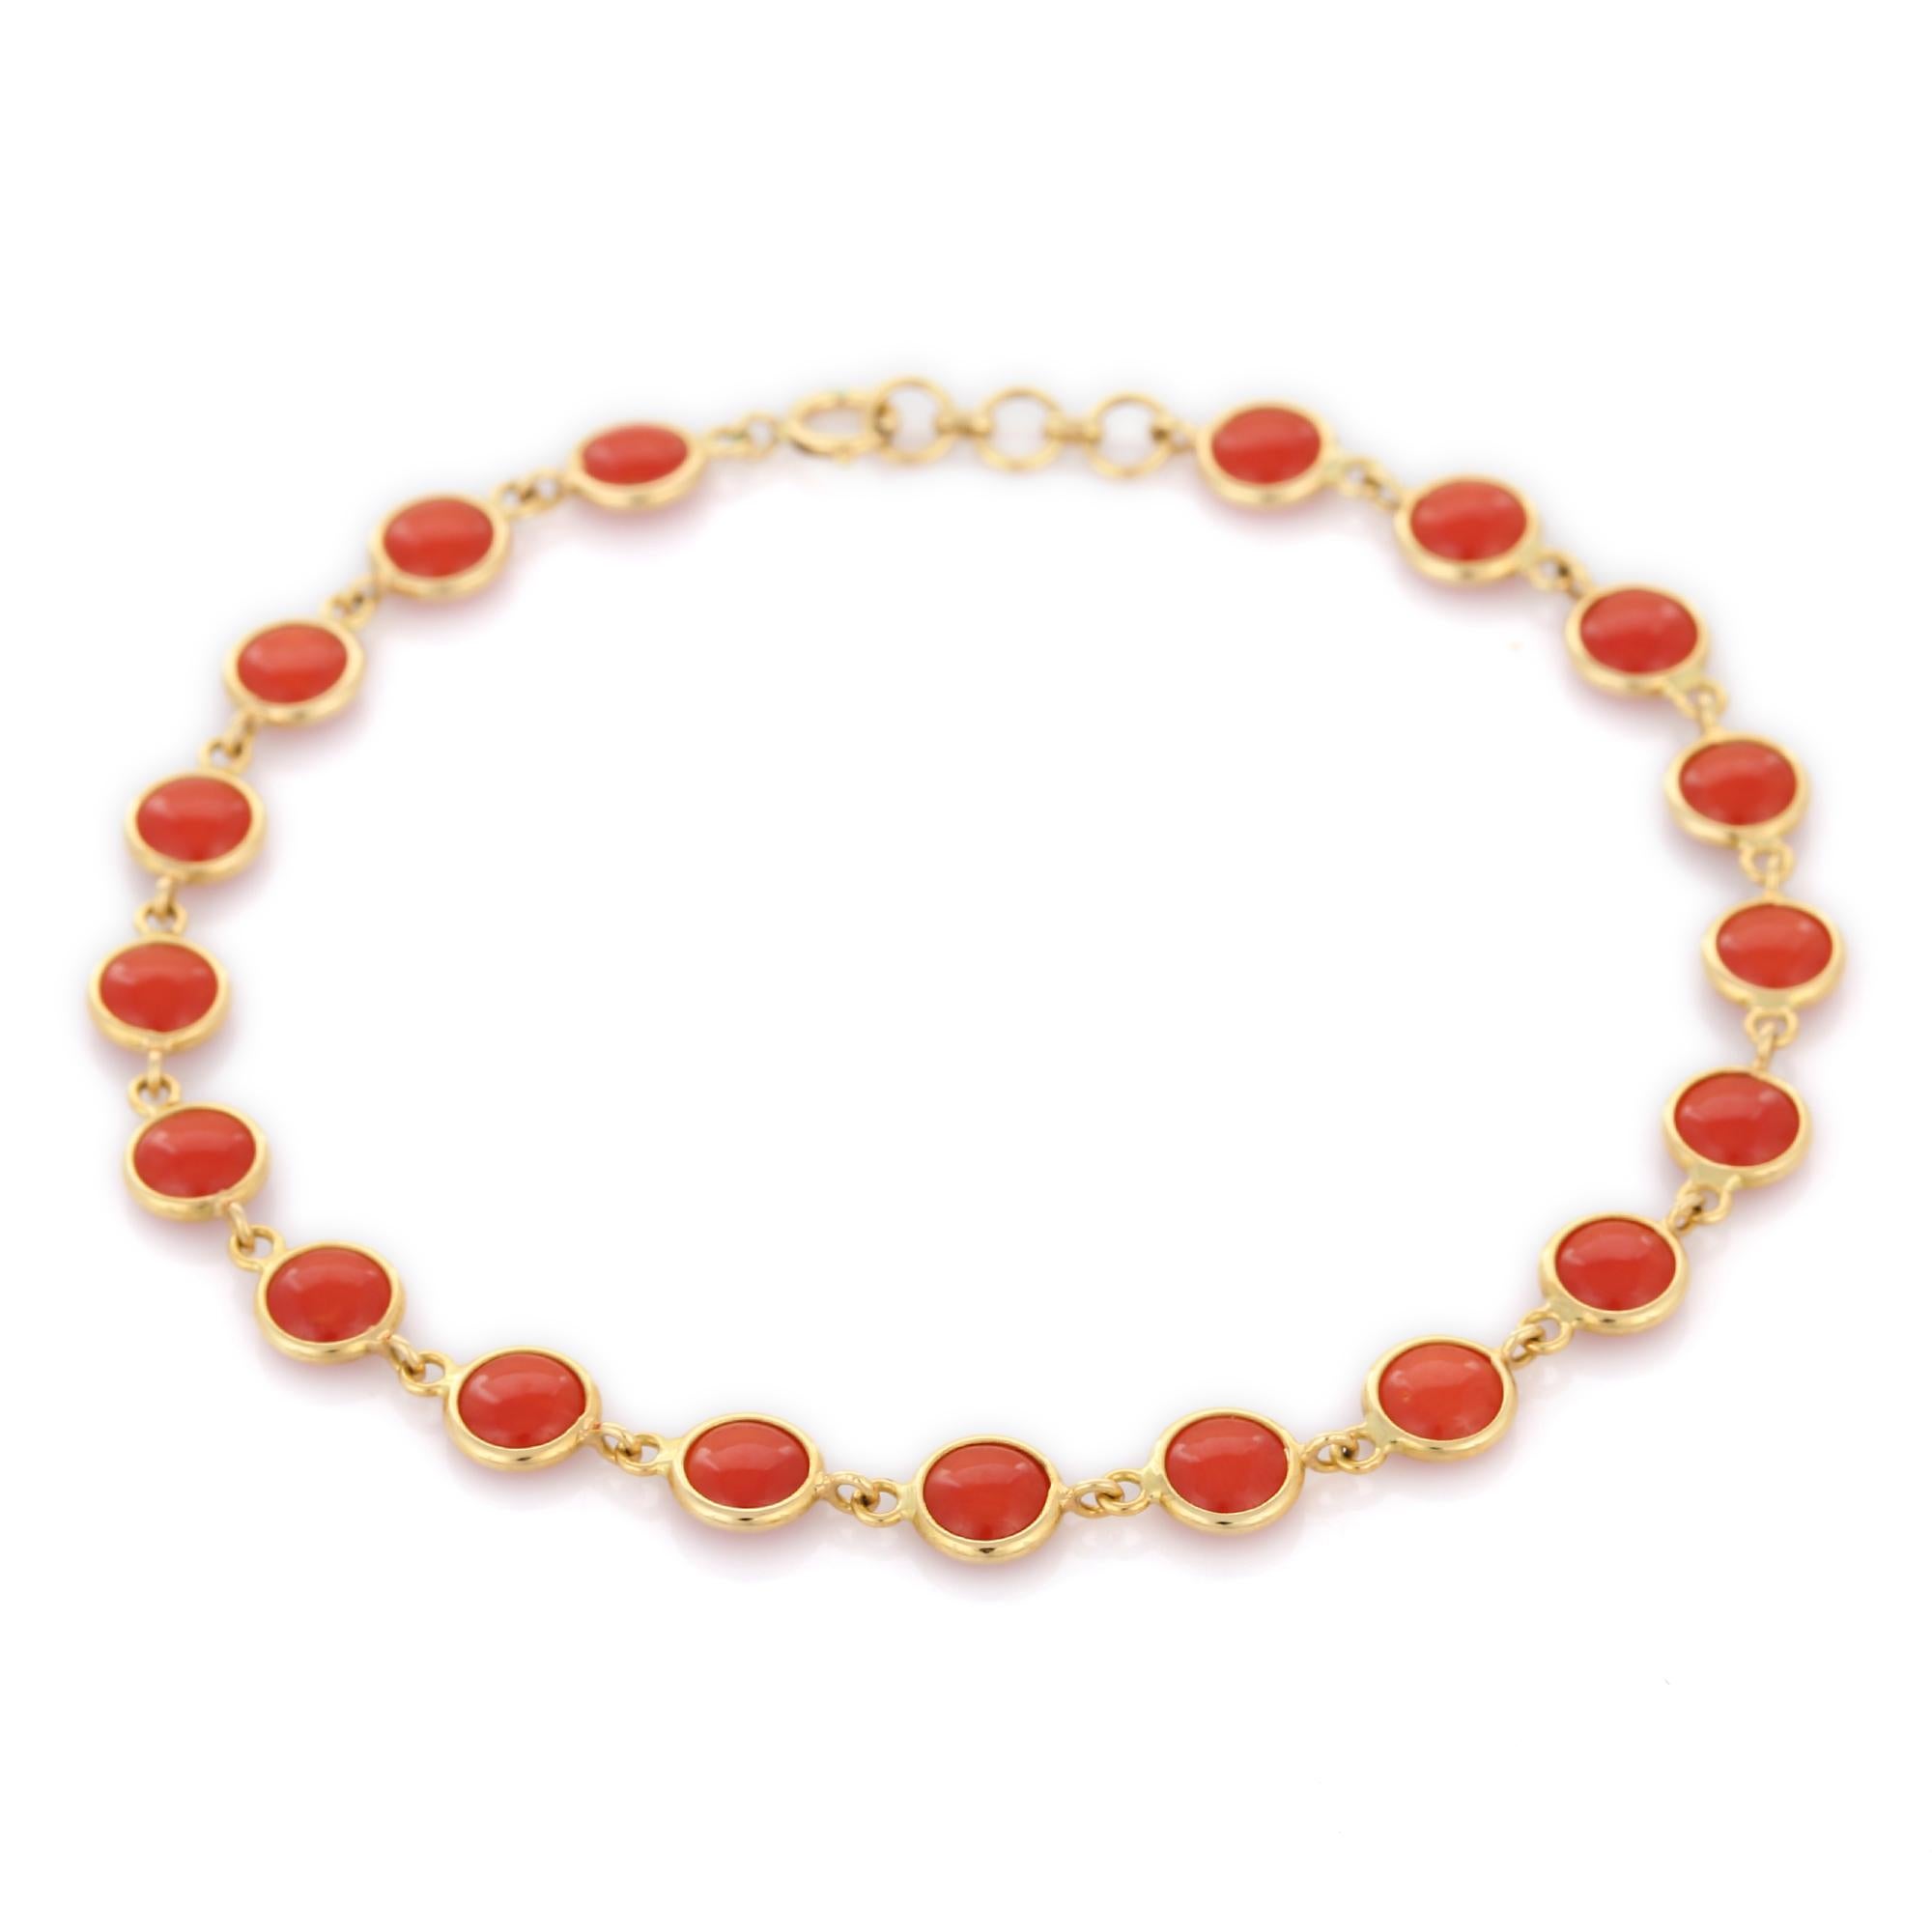 8.2 ct Round Cut Coral Station Chain Bracelet Studded in 18K Yellow Gold In New Condition For Sale In Houston, TX